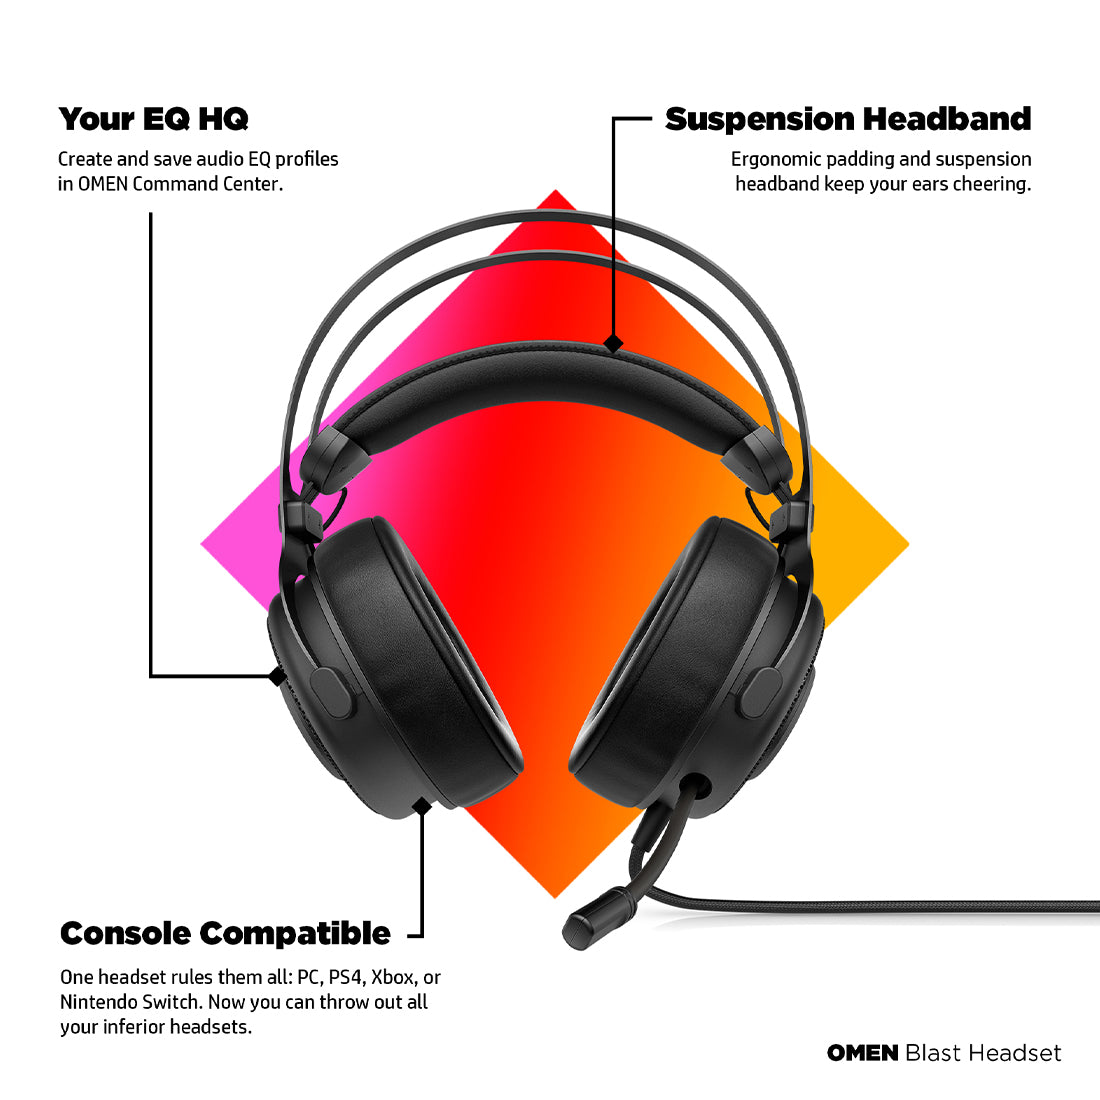 OMEN Blast Headset with 7.1 Surround Sound 24-bit USB DAC and Noise Cancelling Mic